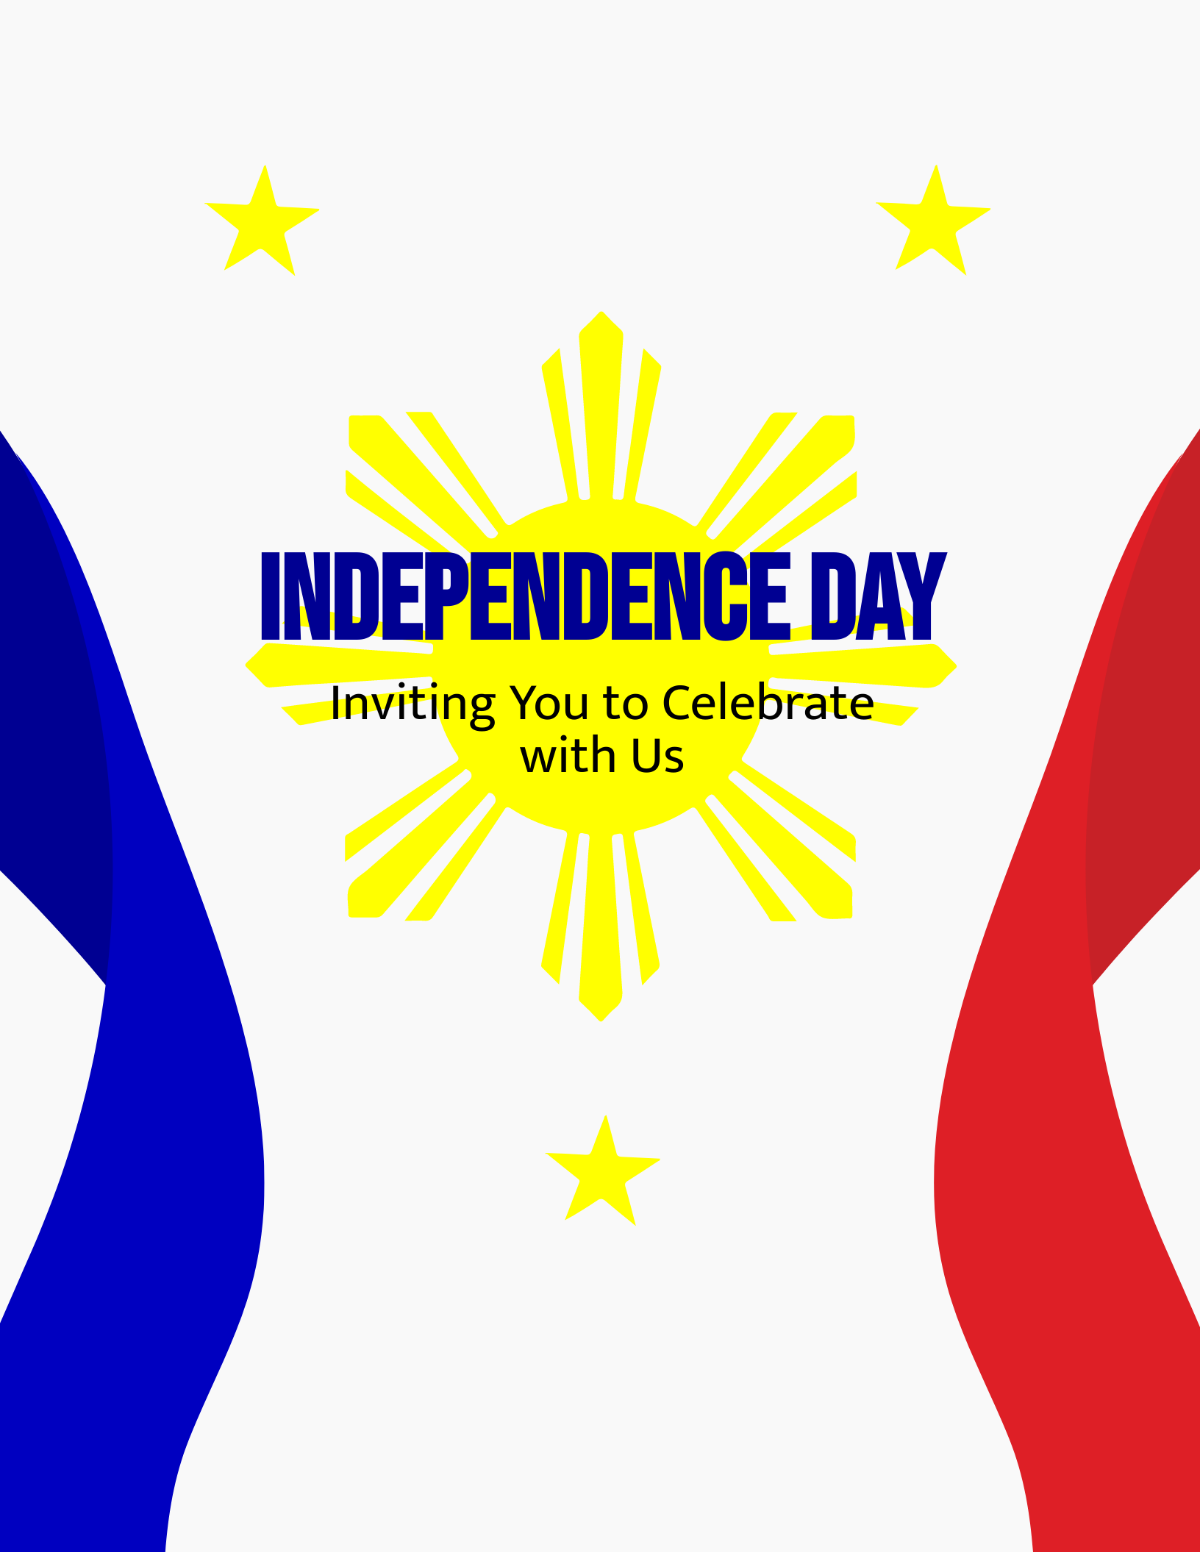 Philippines Independence Day Invitation Flyer